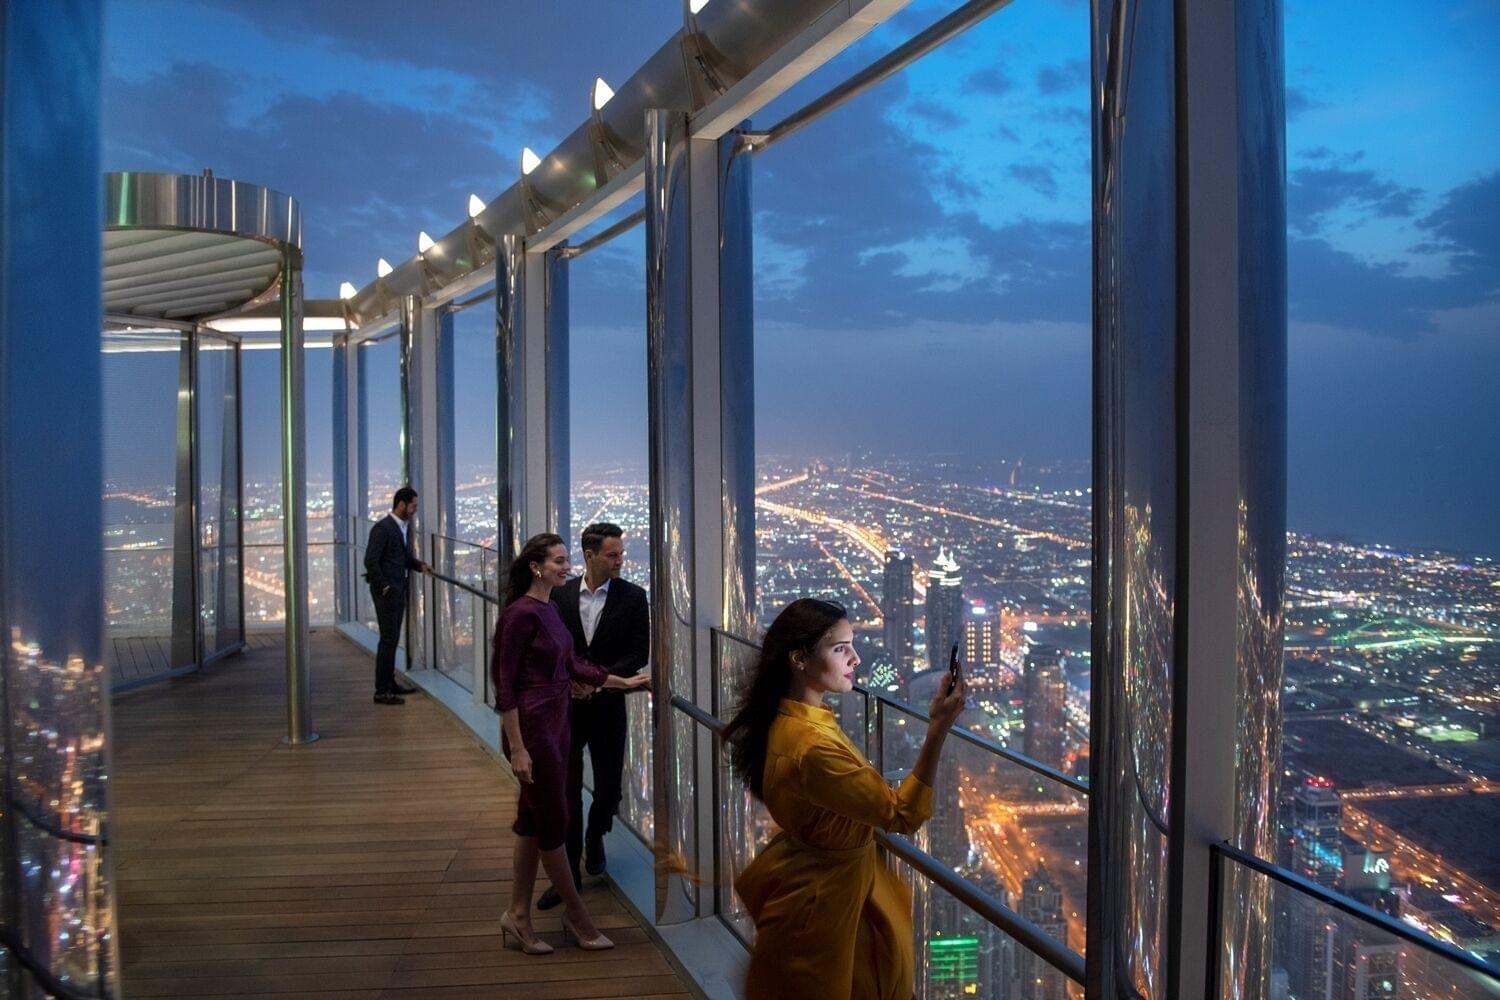 Admire the stunning views of the city from the 124th level